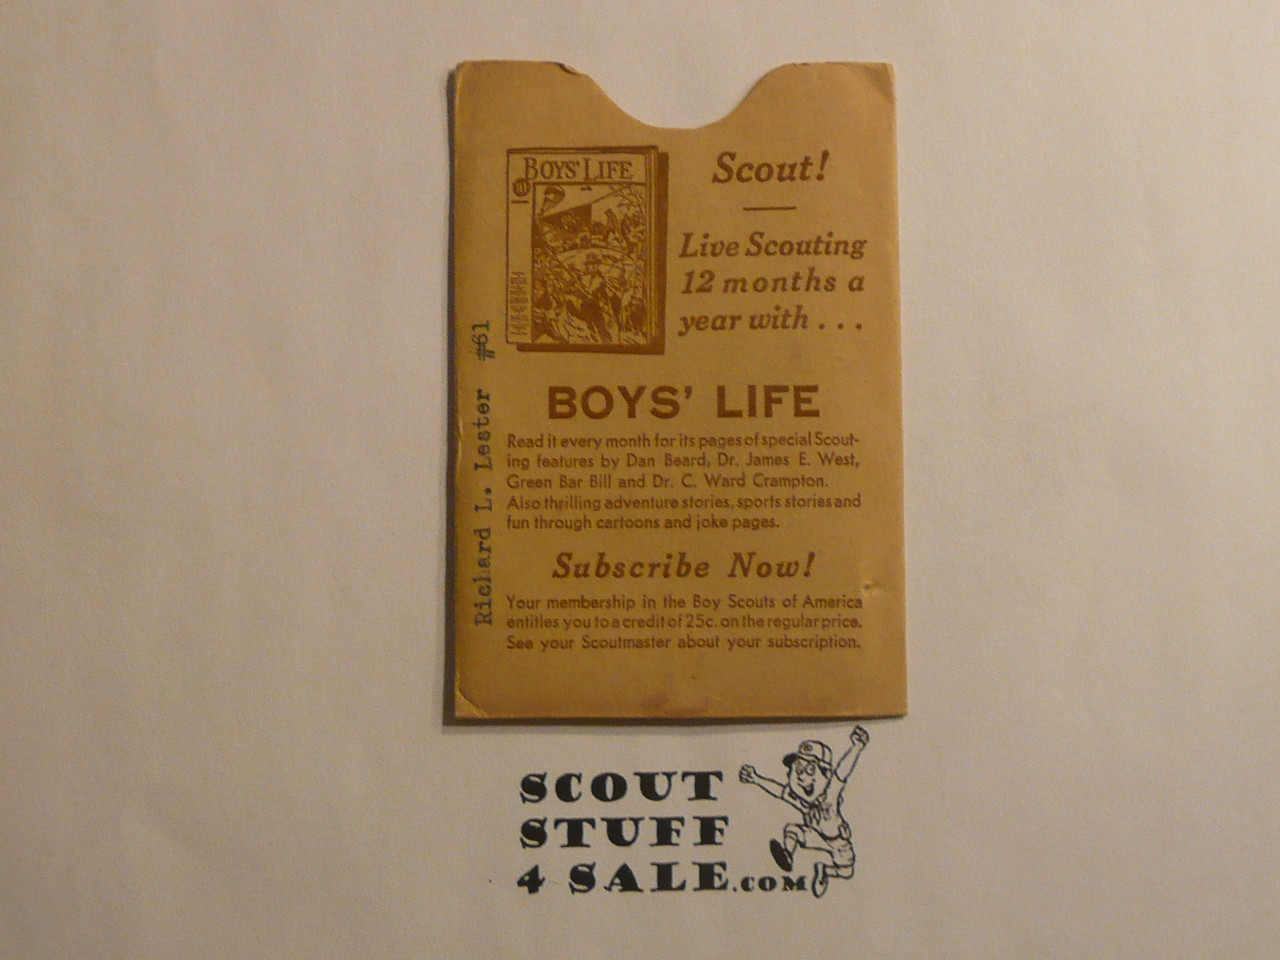 1940 Boy Scout Membership Card, 3-fold, with envelope, 7 signatures, June 1940, BSMC334